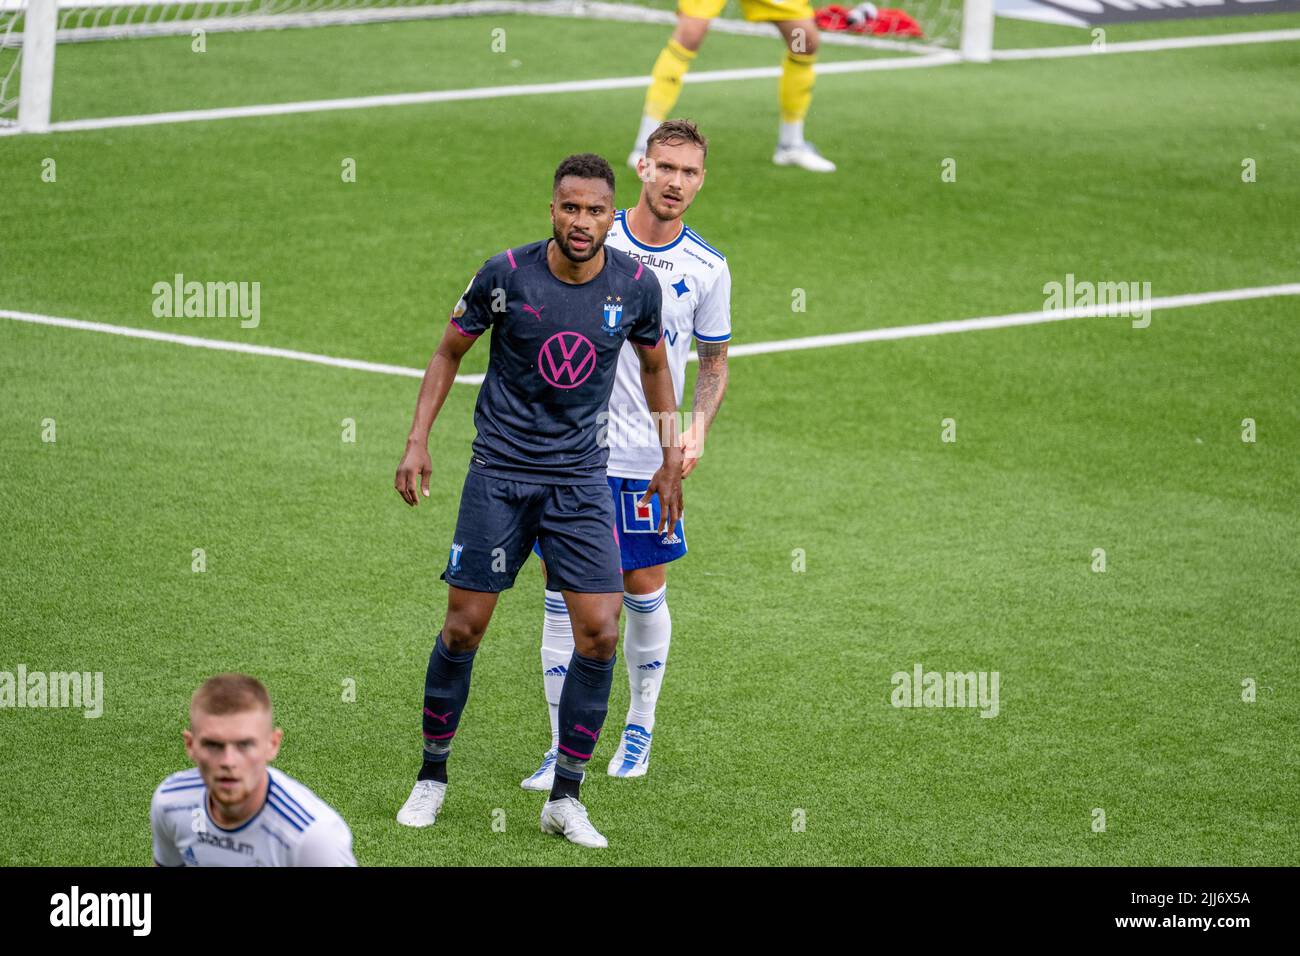 Former international Isaac Kiese Thelin nr 9 playing for Malmö FF against IFK Norrköping's Linus Wahlqvist Egnell Stock Photo